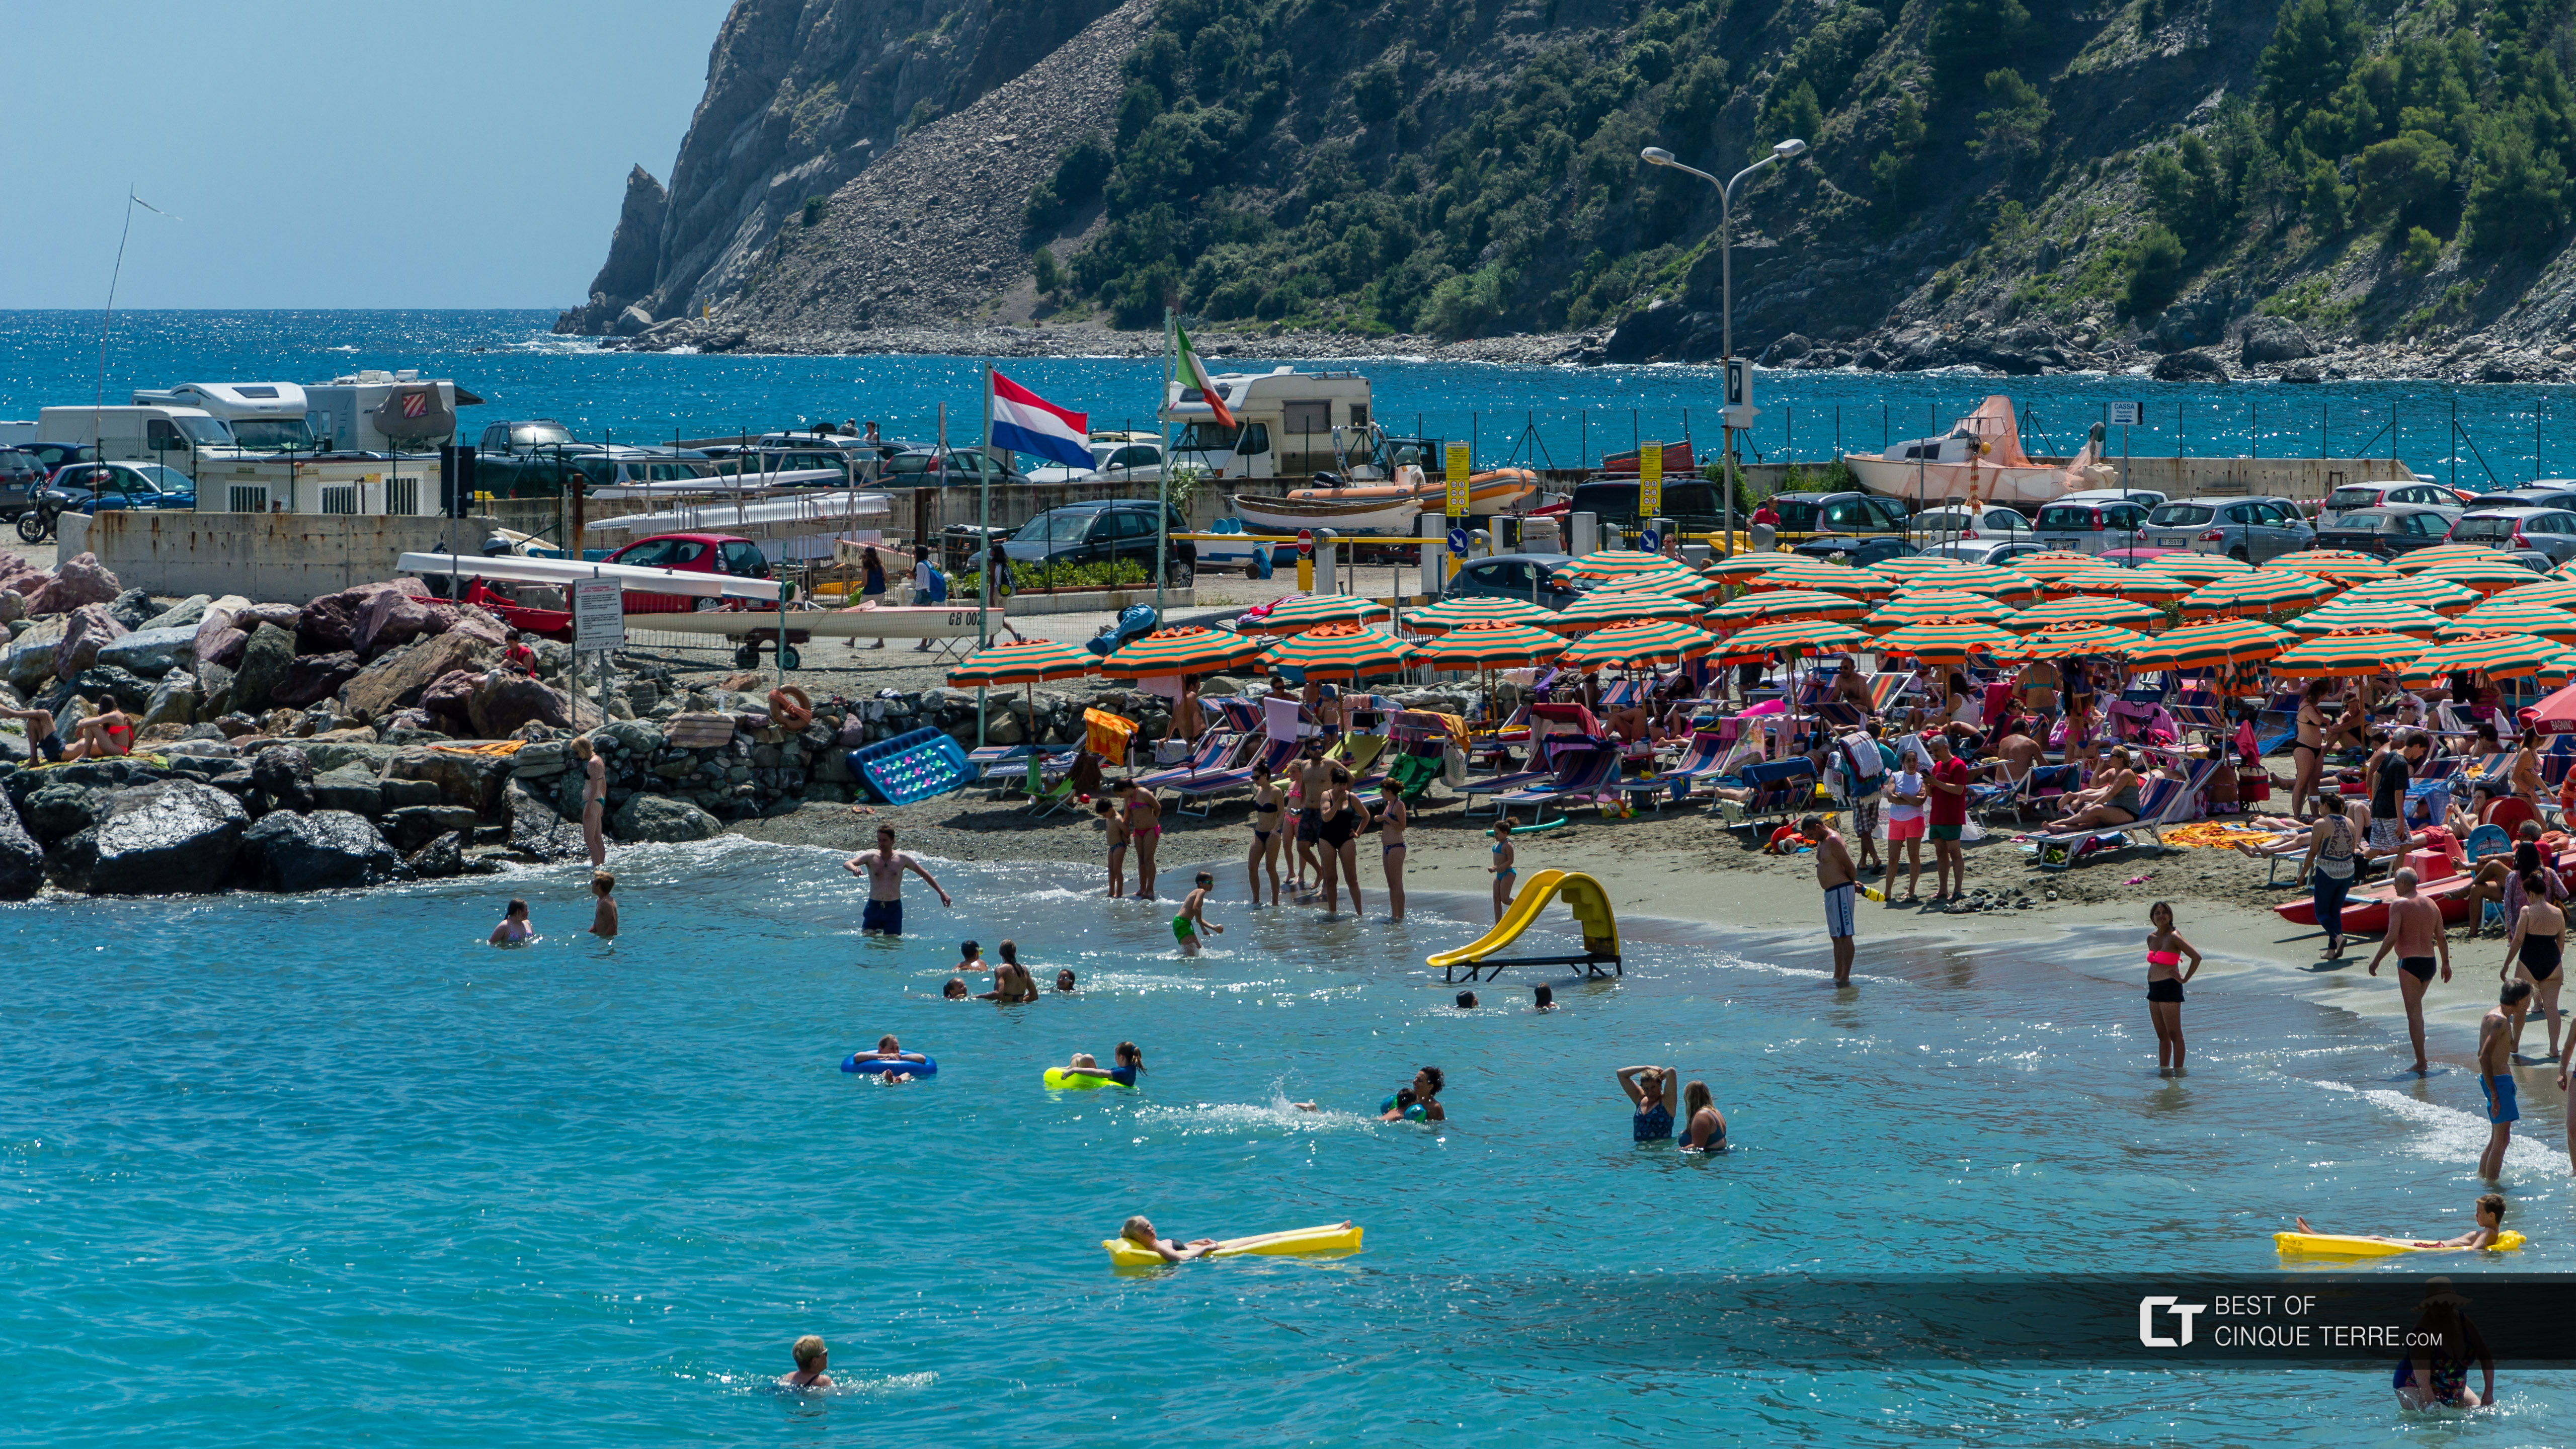 A popular beach for families with kids, Cinque Terre, Italy